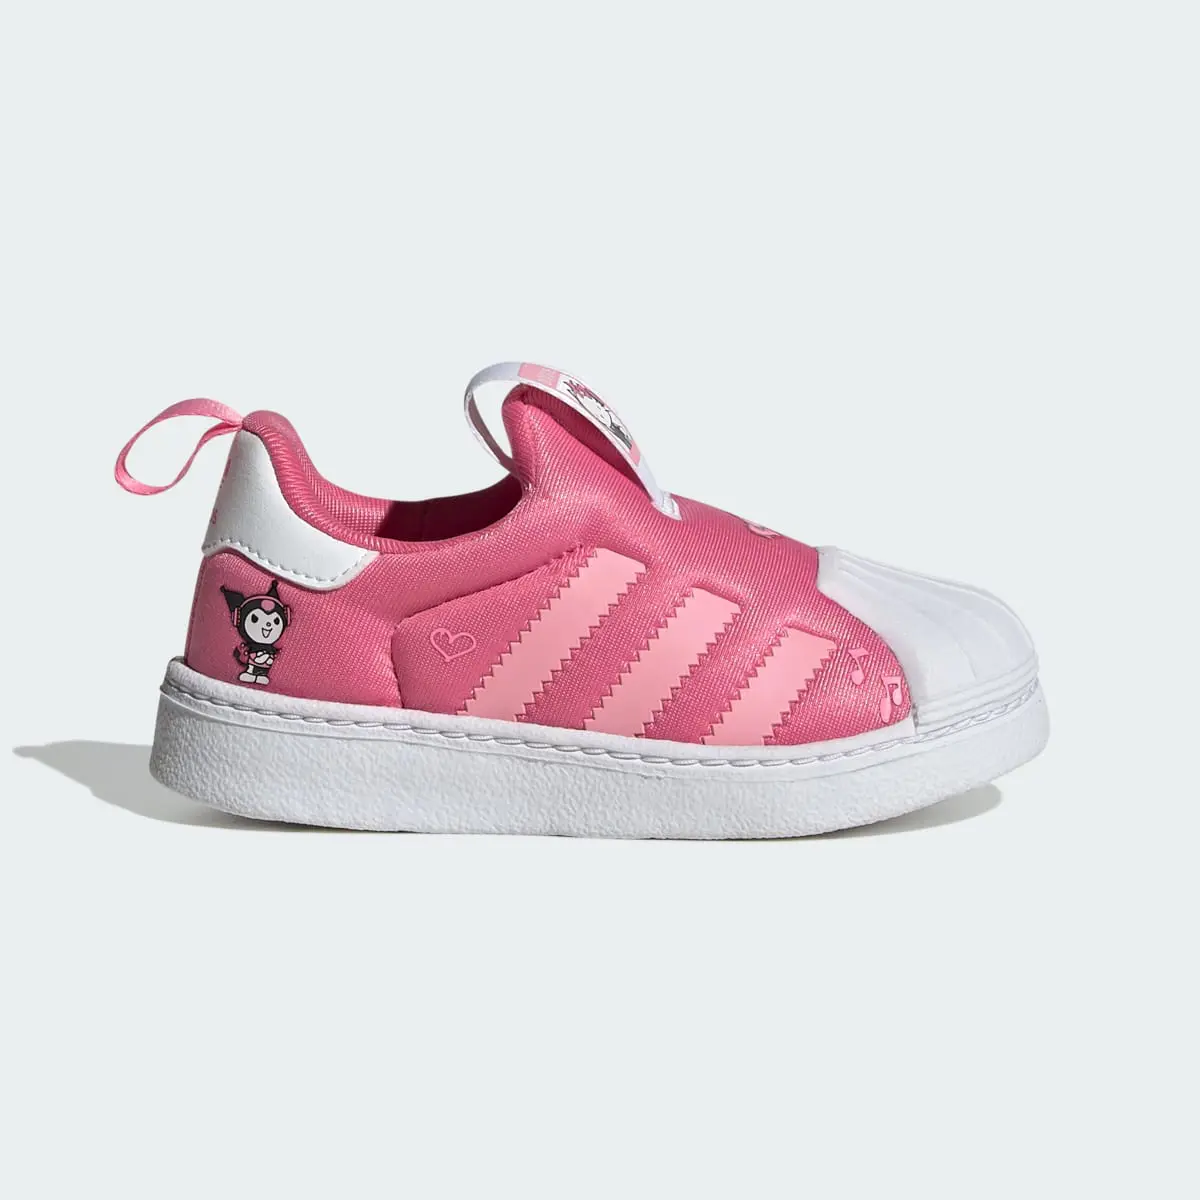 Adidas Originals x Hello Kitty and Friends Superstar 360 Shoes Kids. 2